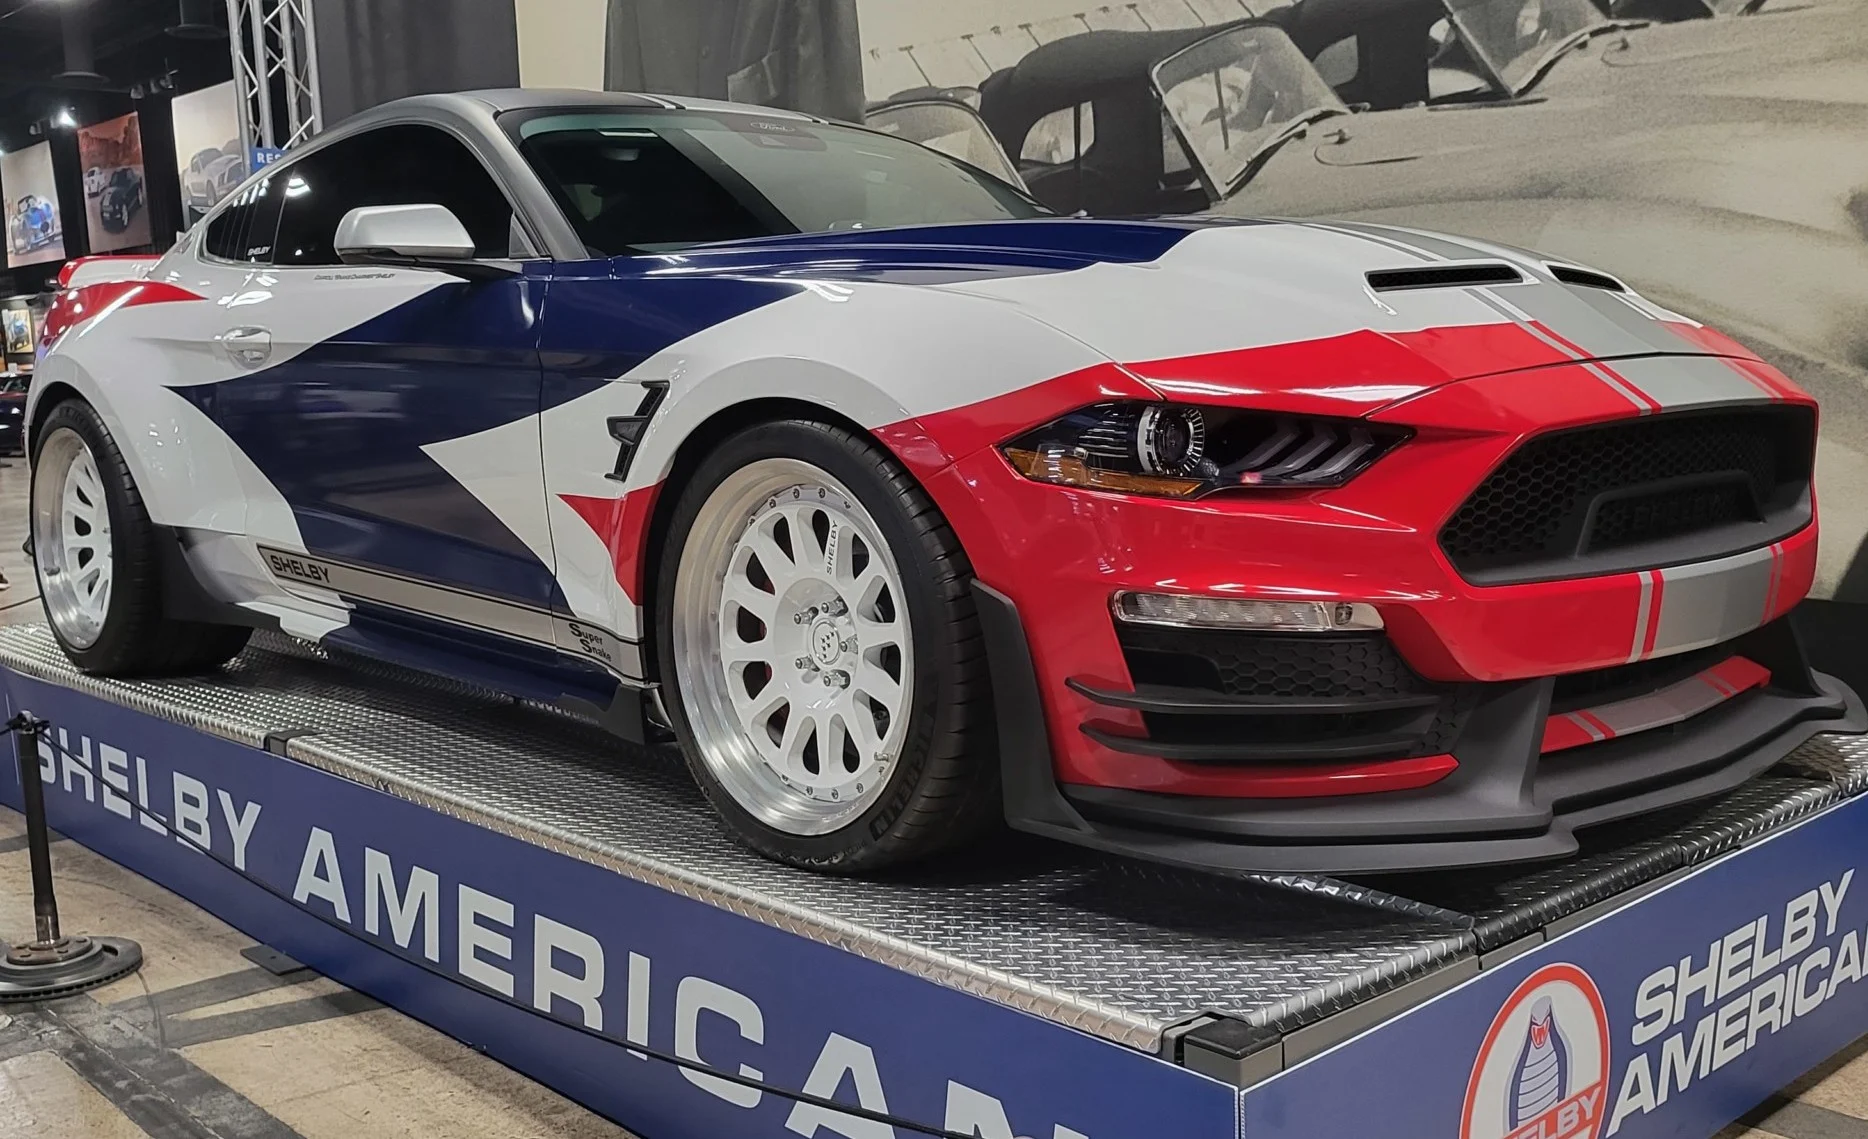 Mustang Of The Day: 2021 Shelby “Snake Charmer” Widebody Mustang